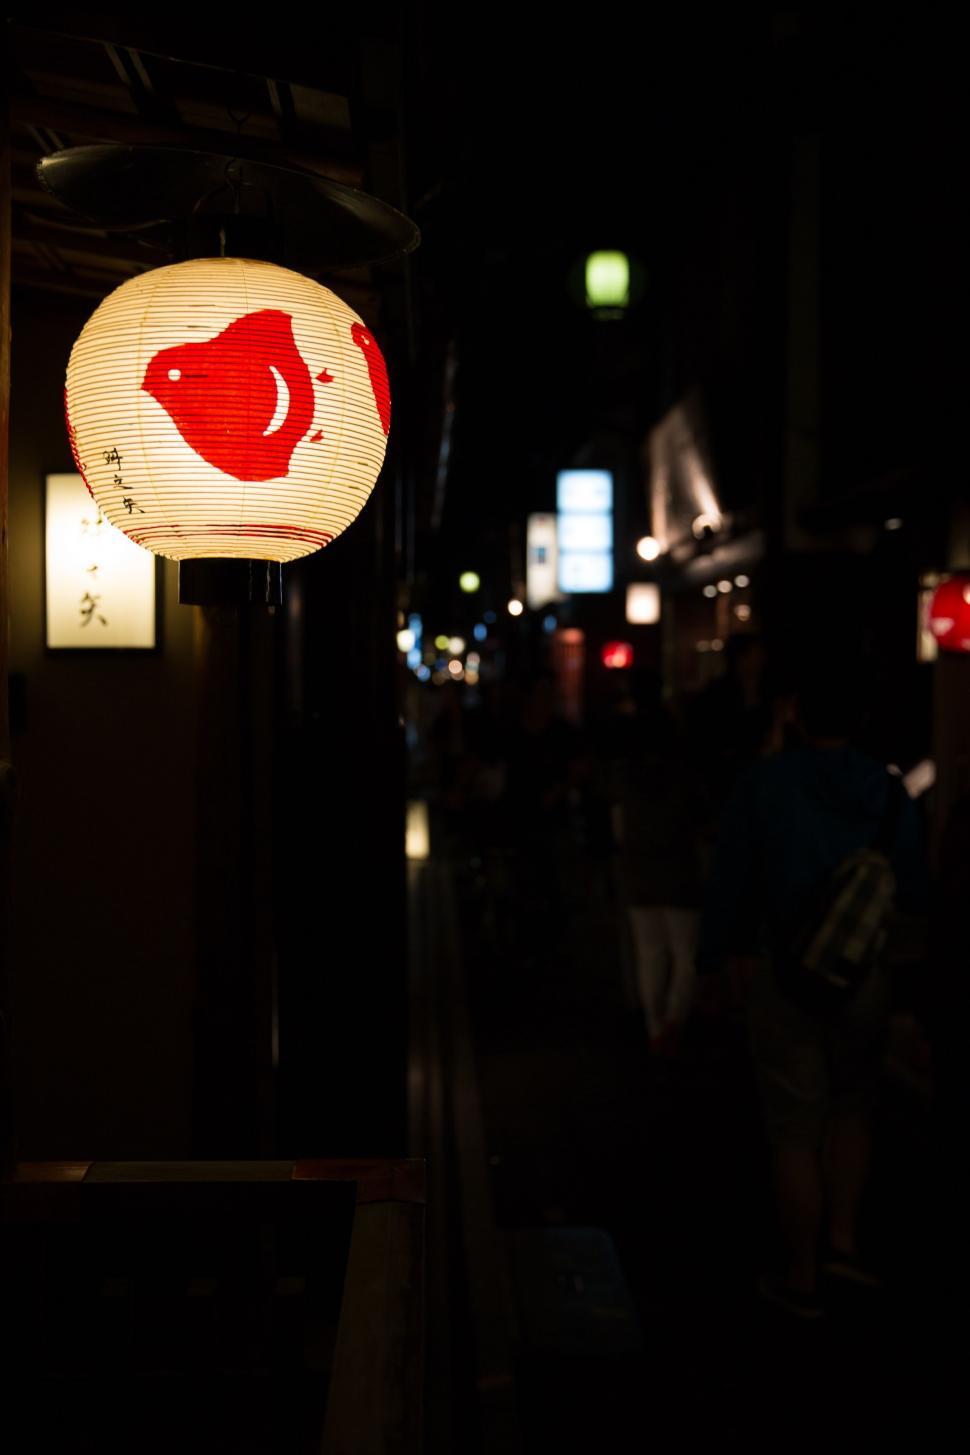 Free Image of Red and White Paper Lantern Hanging From a Pole 